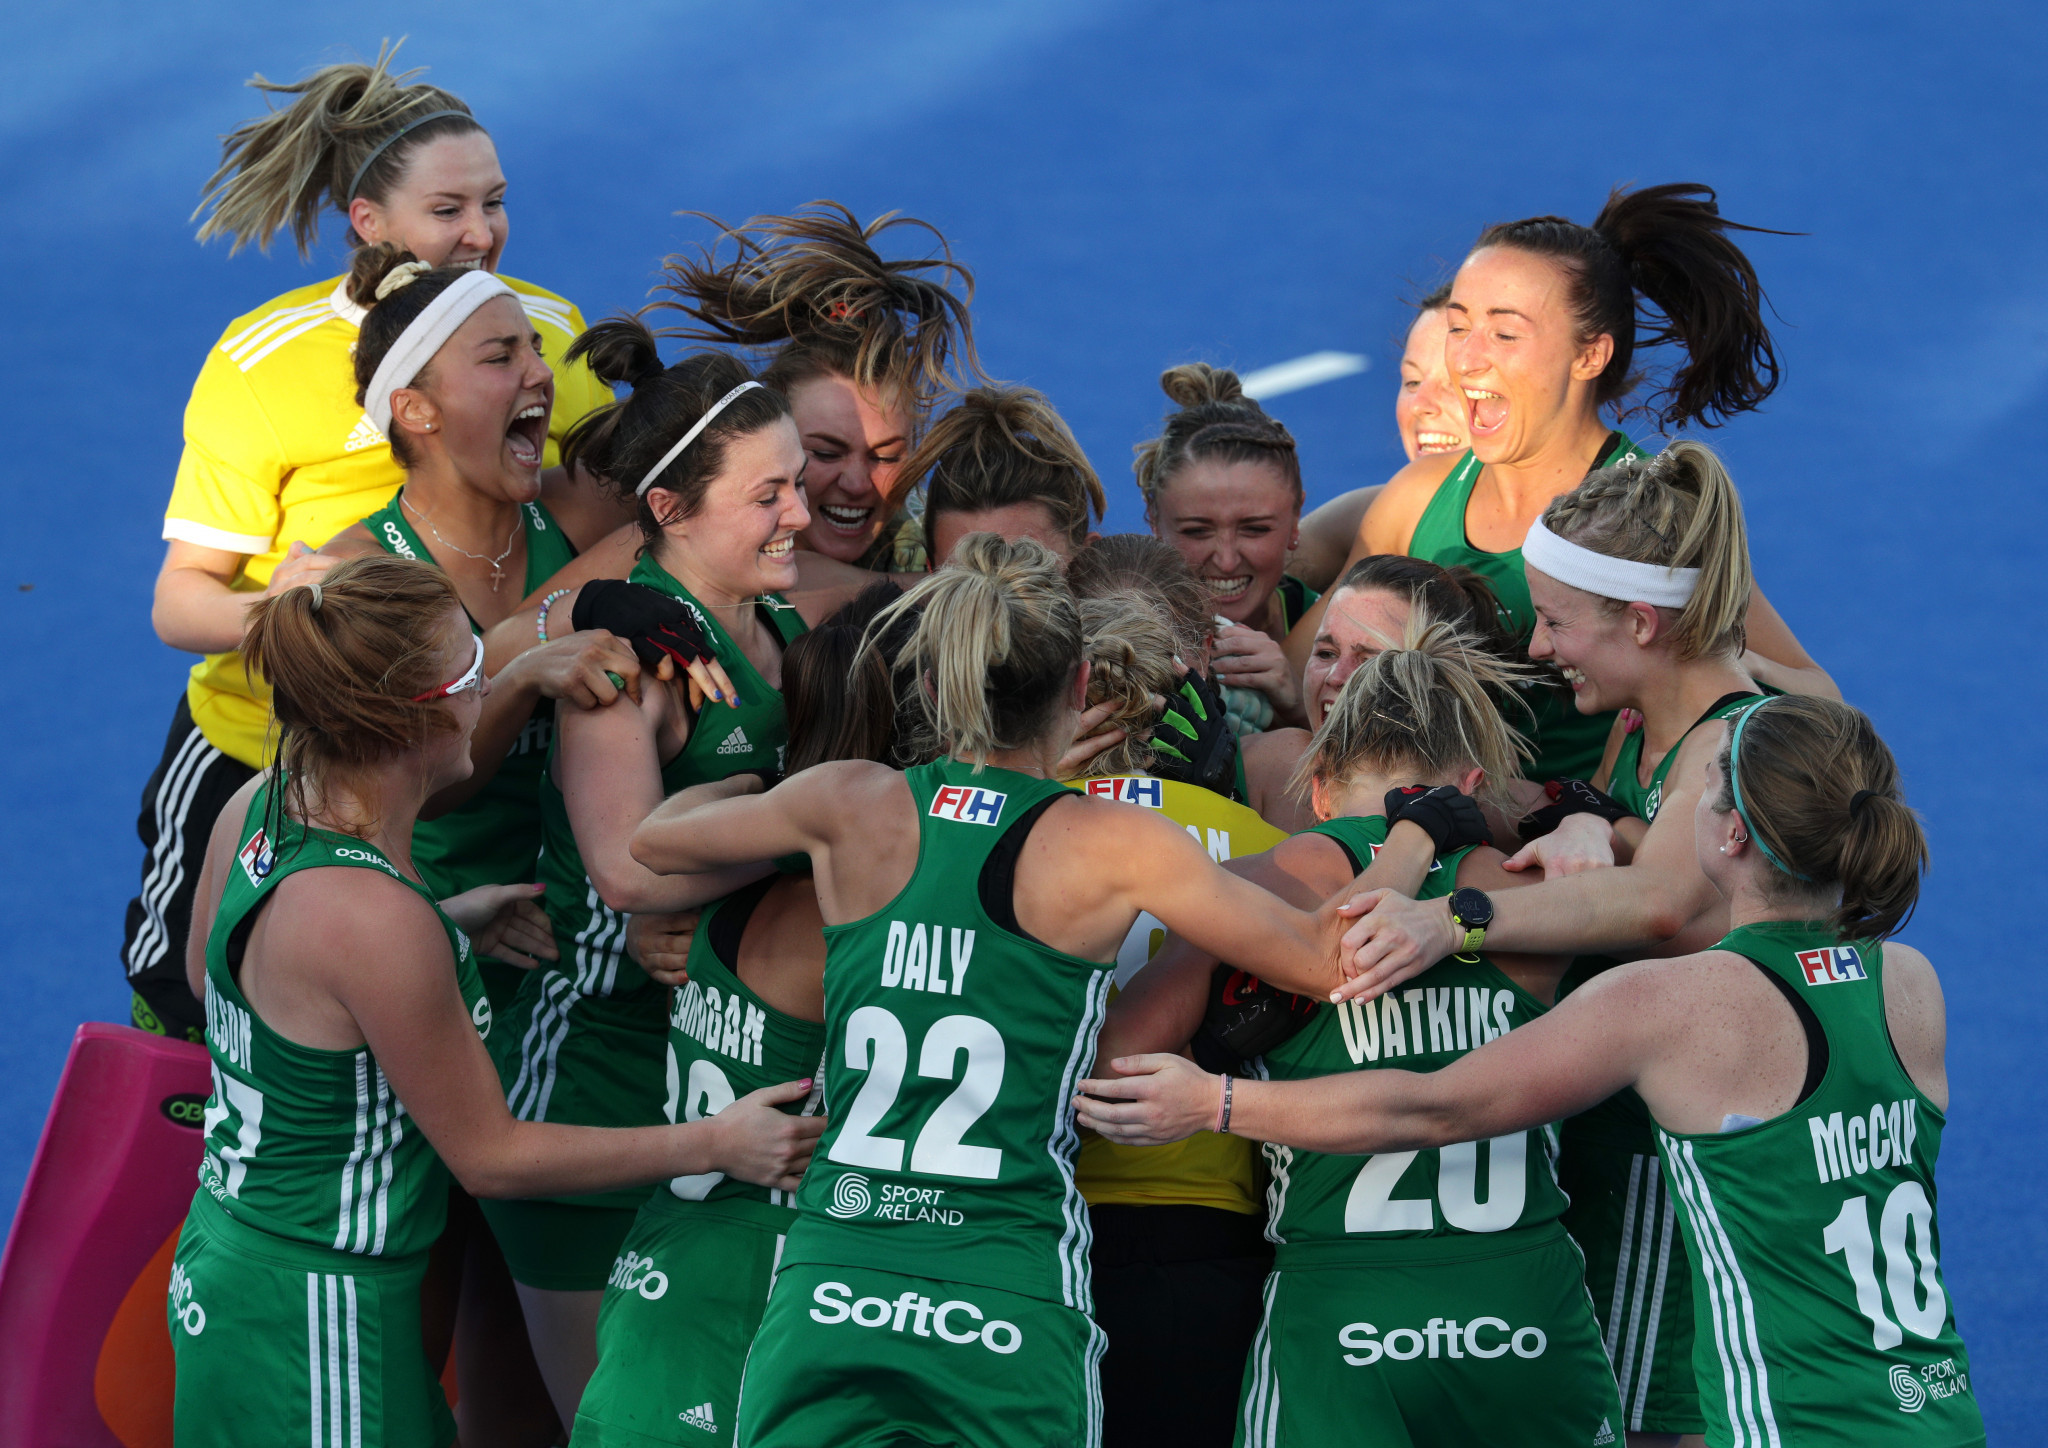 Holders Netherlands too strong for England as Ireland make it to first Women’s Hockey World Cup semi-final